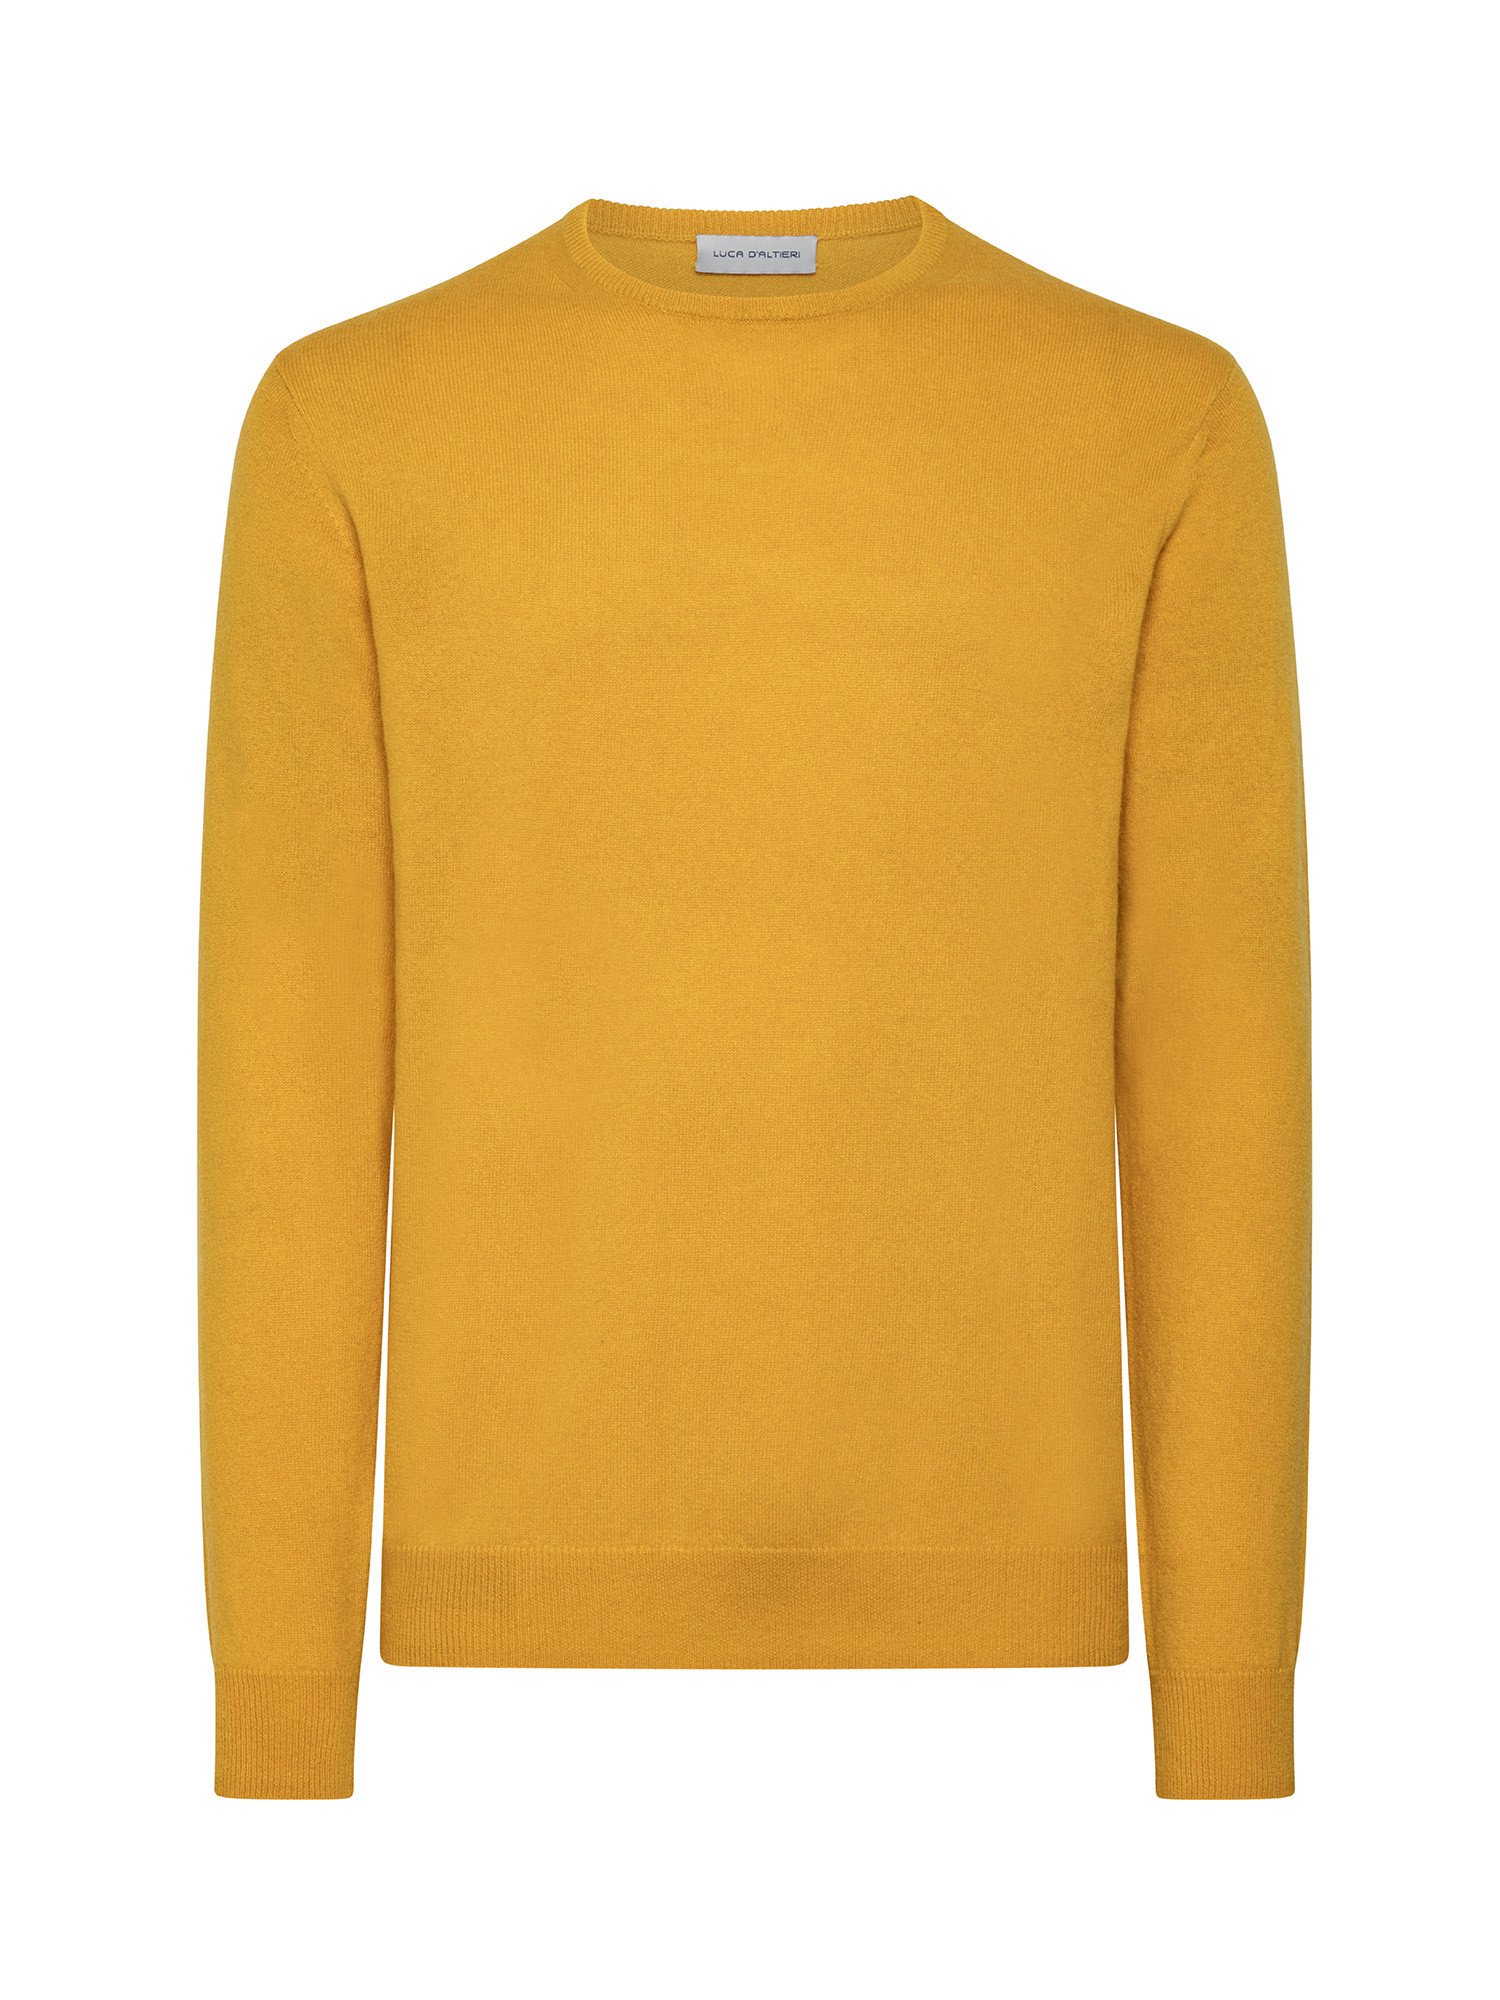 Pure cashmere crewneck pullover, Yellow, large image number 0